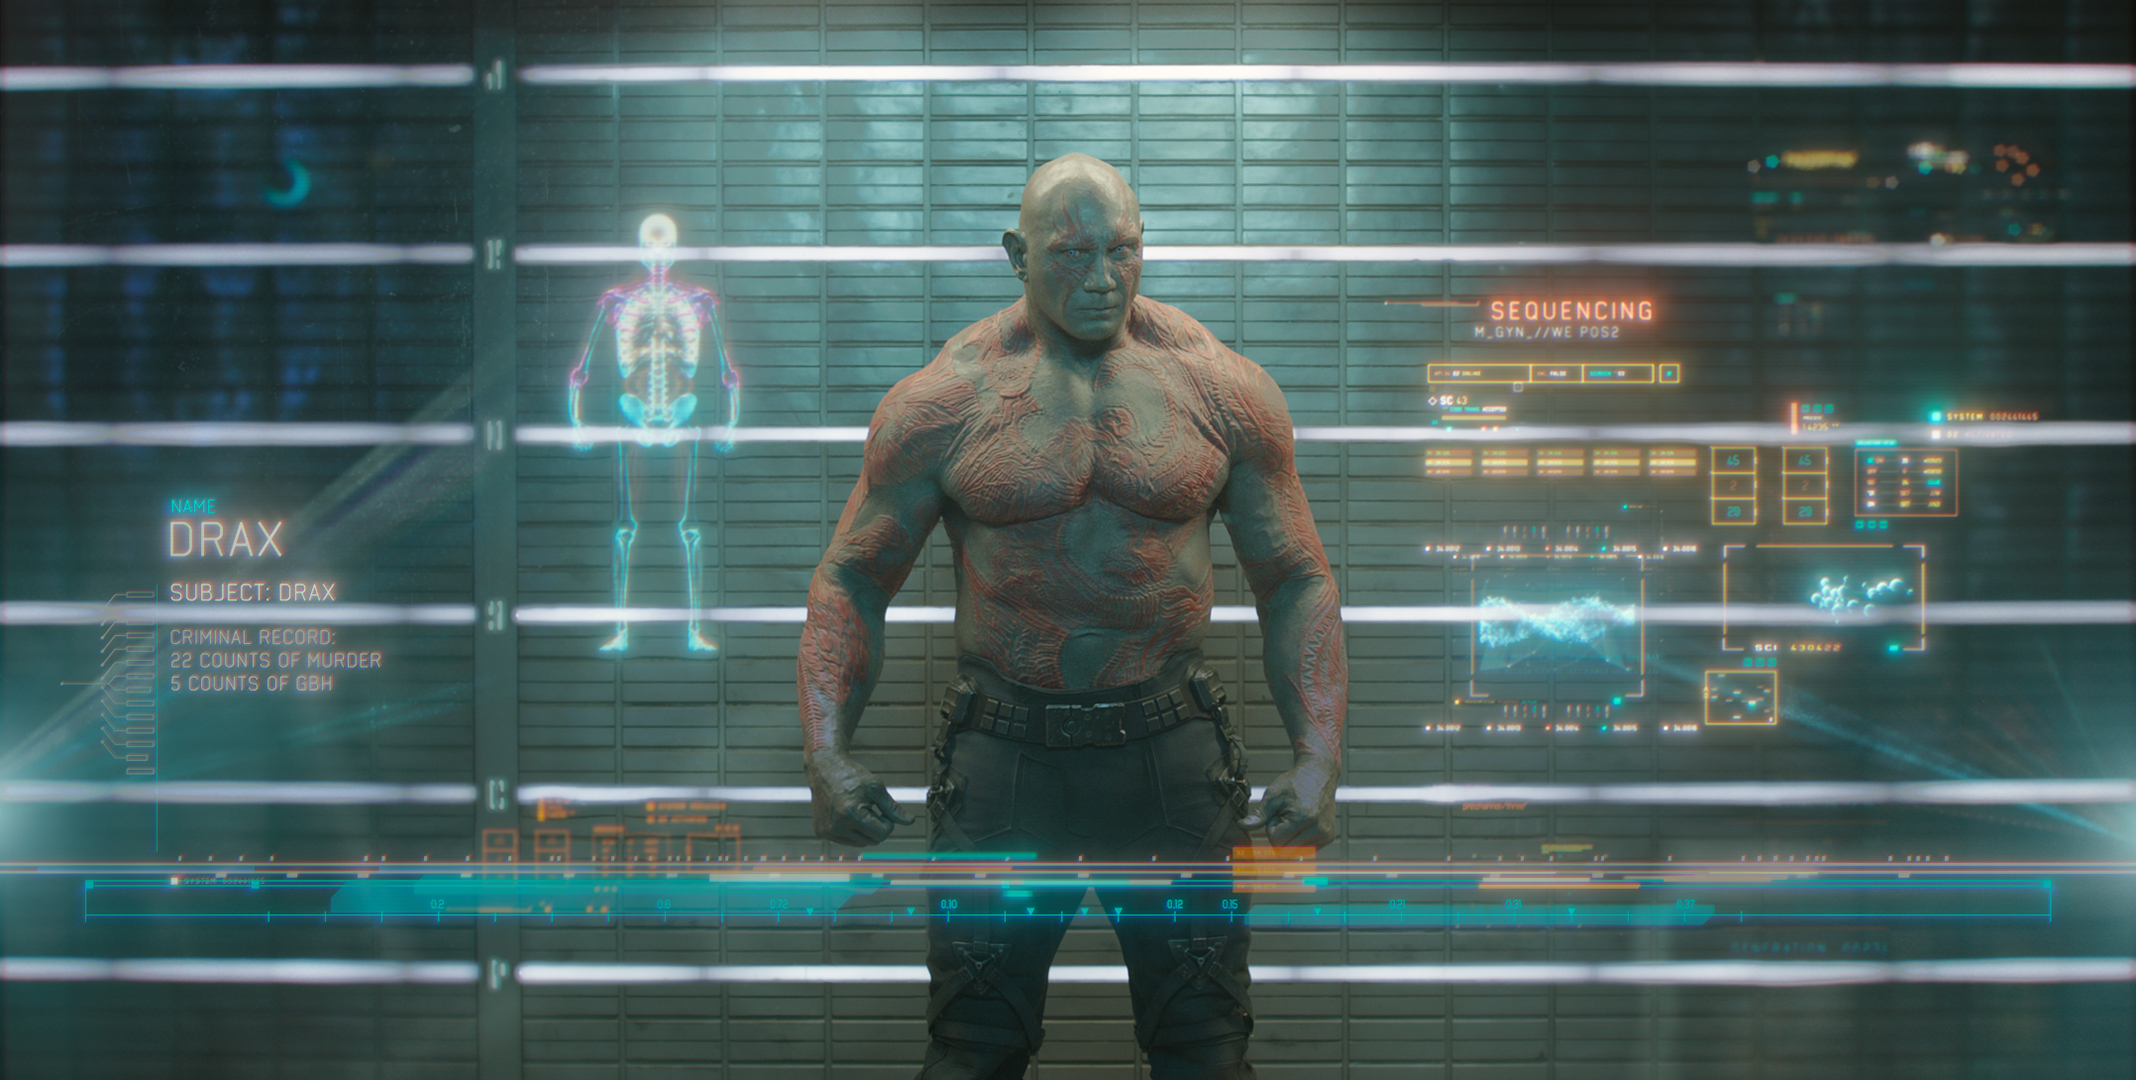 WANTED: Drax the Destroyer! He's Mean, Green, and Especially Hateful Towards Metaphors!